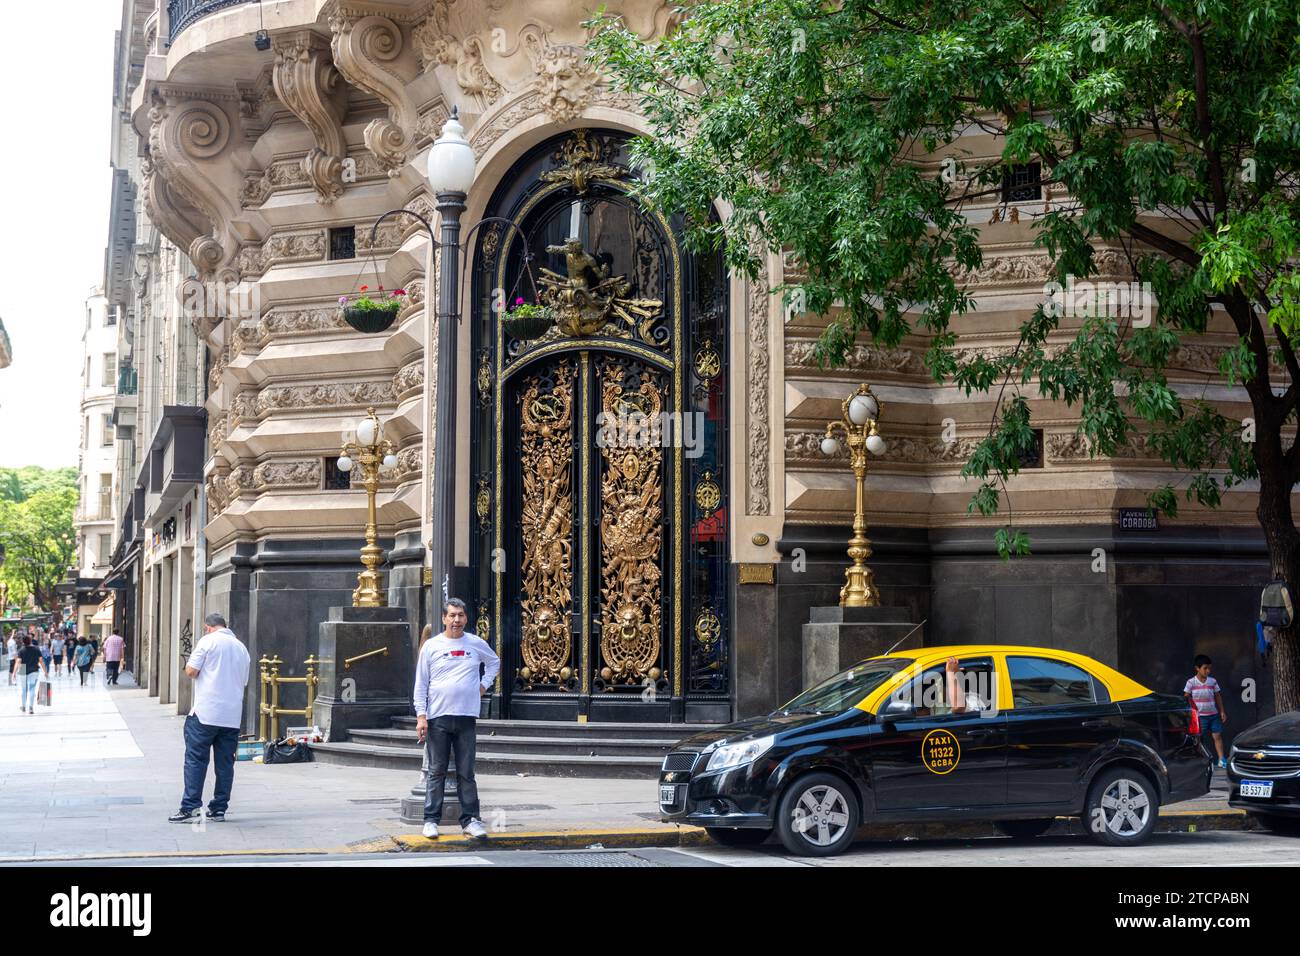 801 florida street. amazing architectural gem. 1914 beaux-arts building with huge arched doorway of ornate cast iron. centro naval club. buenos aires. Stock Photo